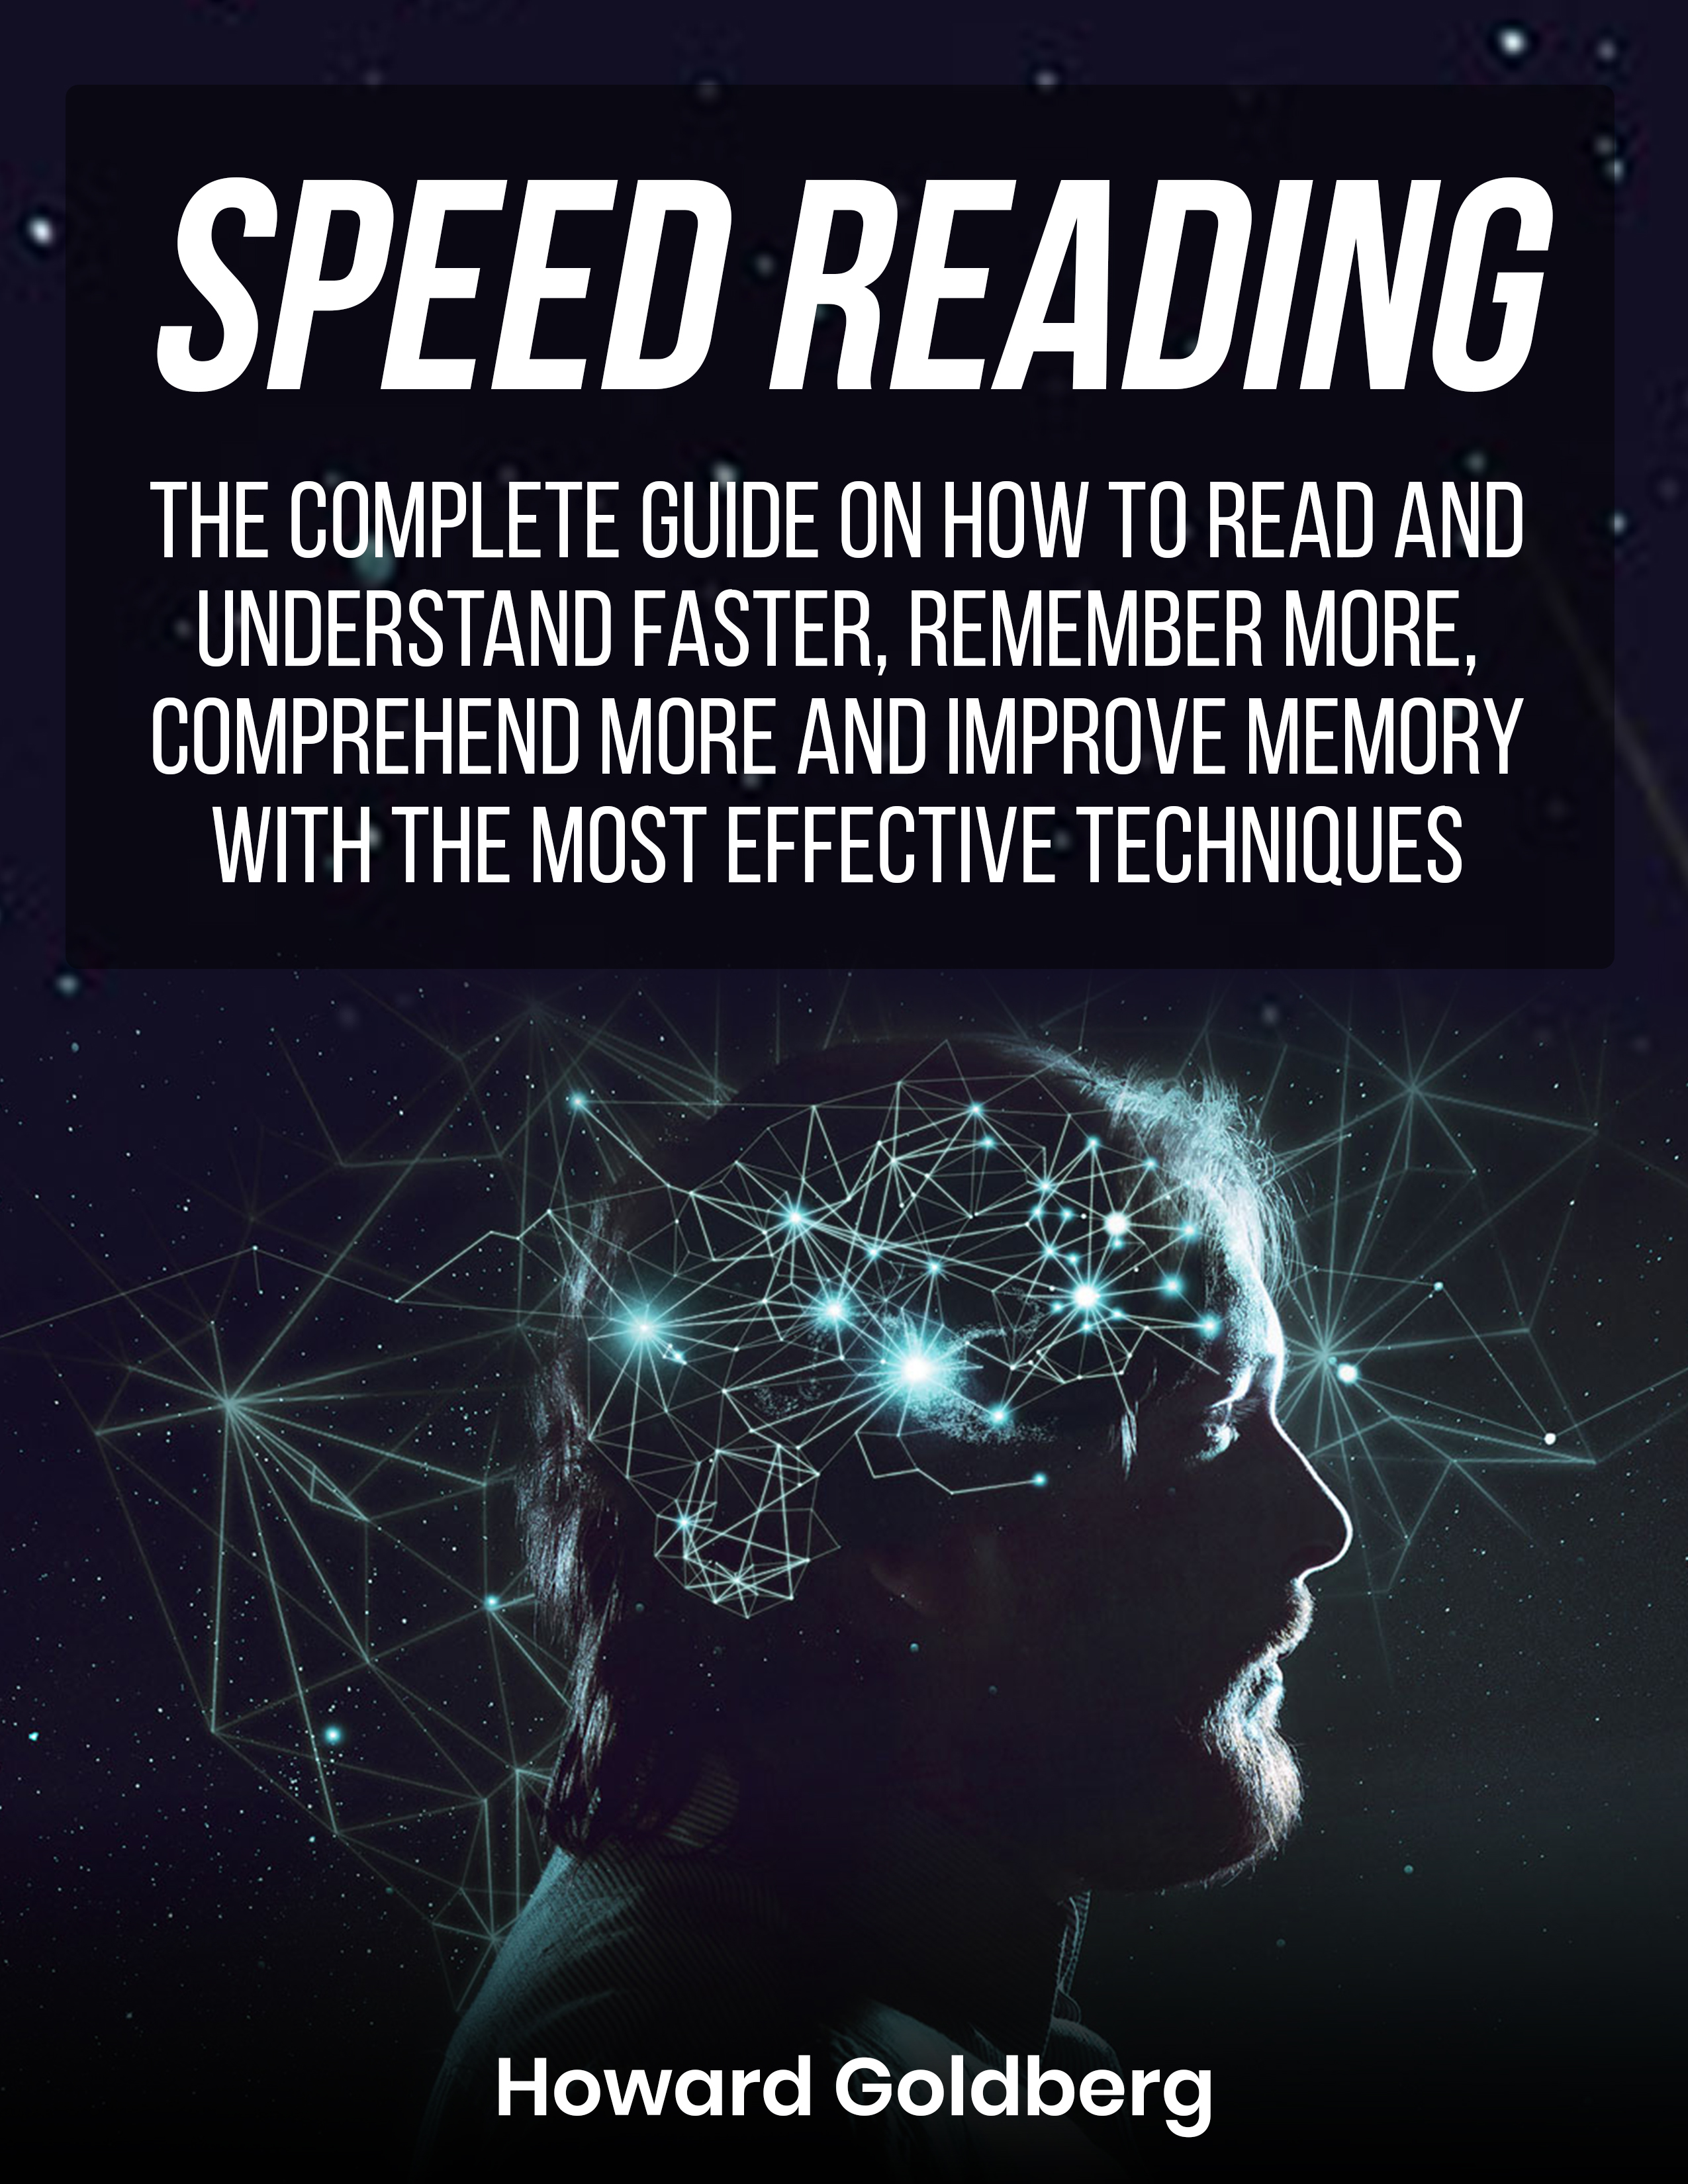 FREE: SPEED READING: The complete guide on how to read and understand faster, remember more, comprehend more and improve memory with the most effective techniques by Howard Goldberg